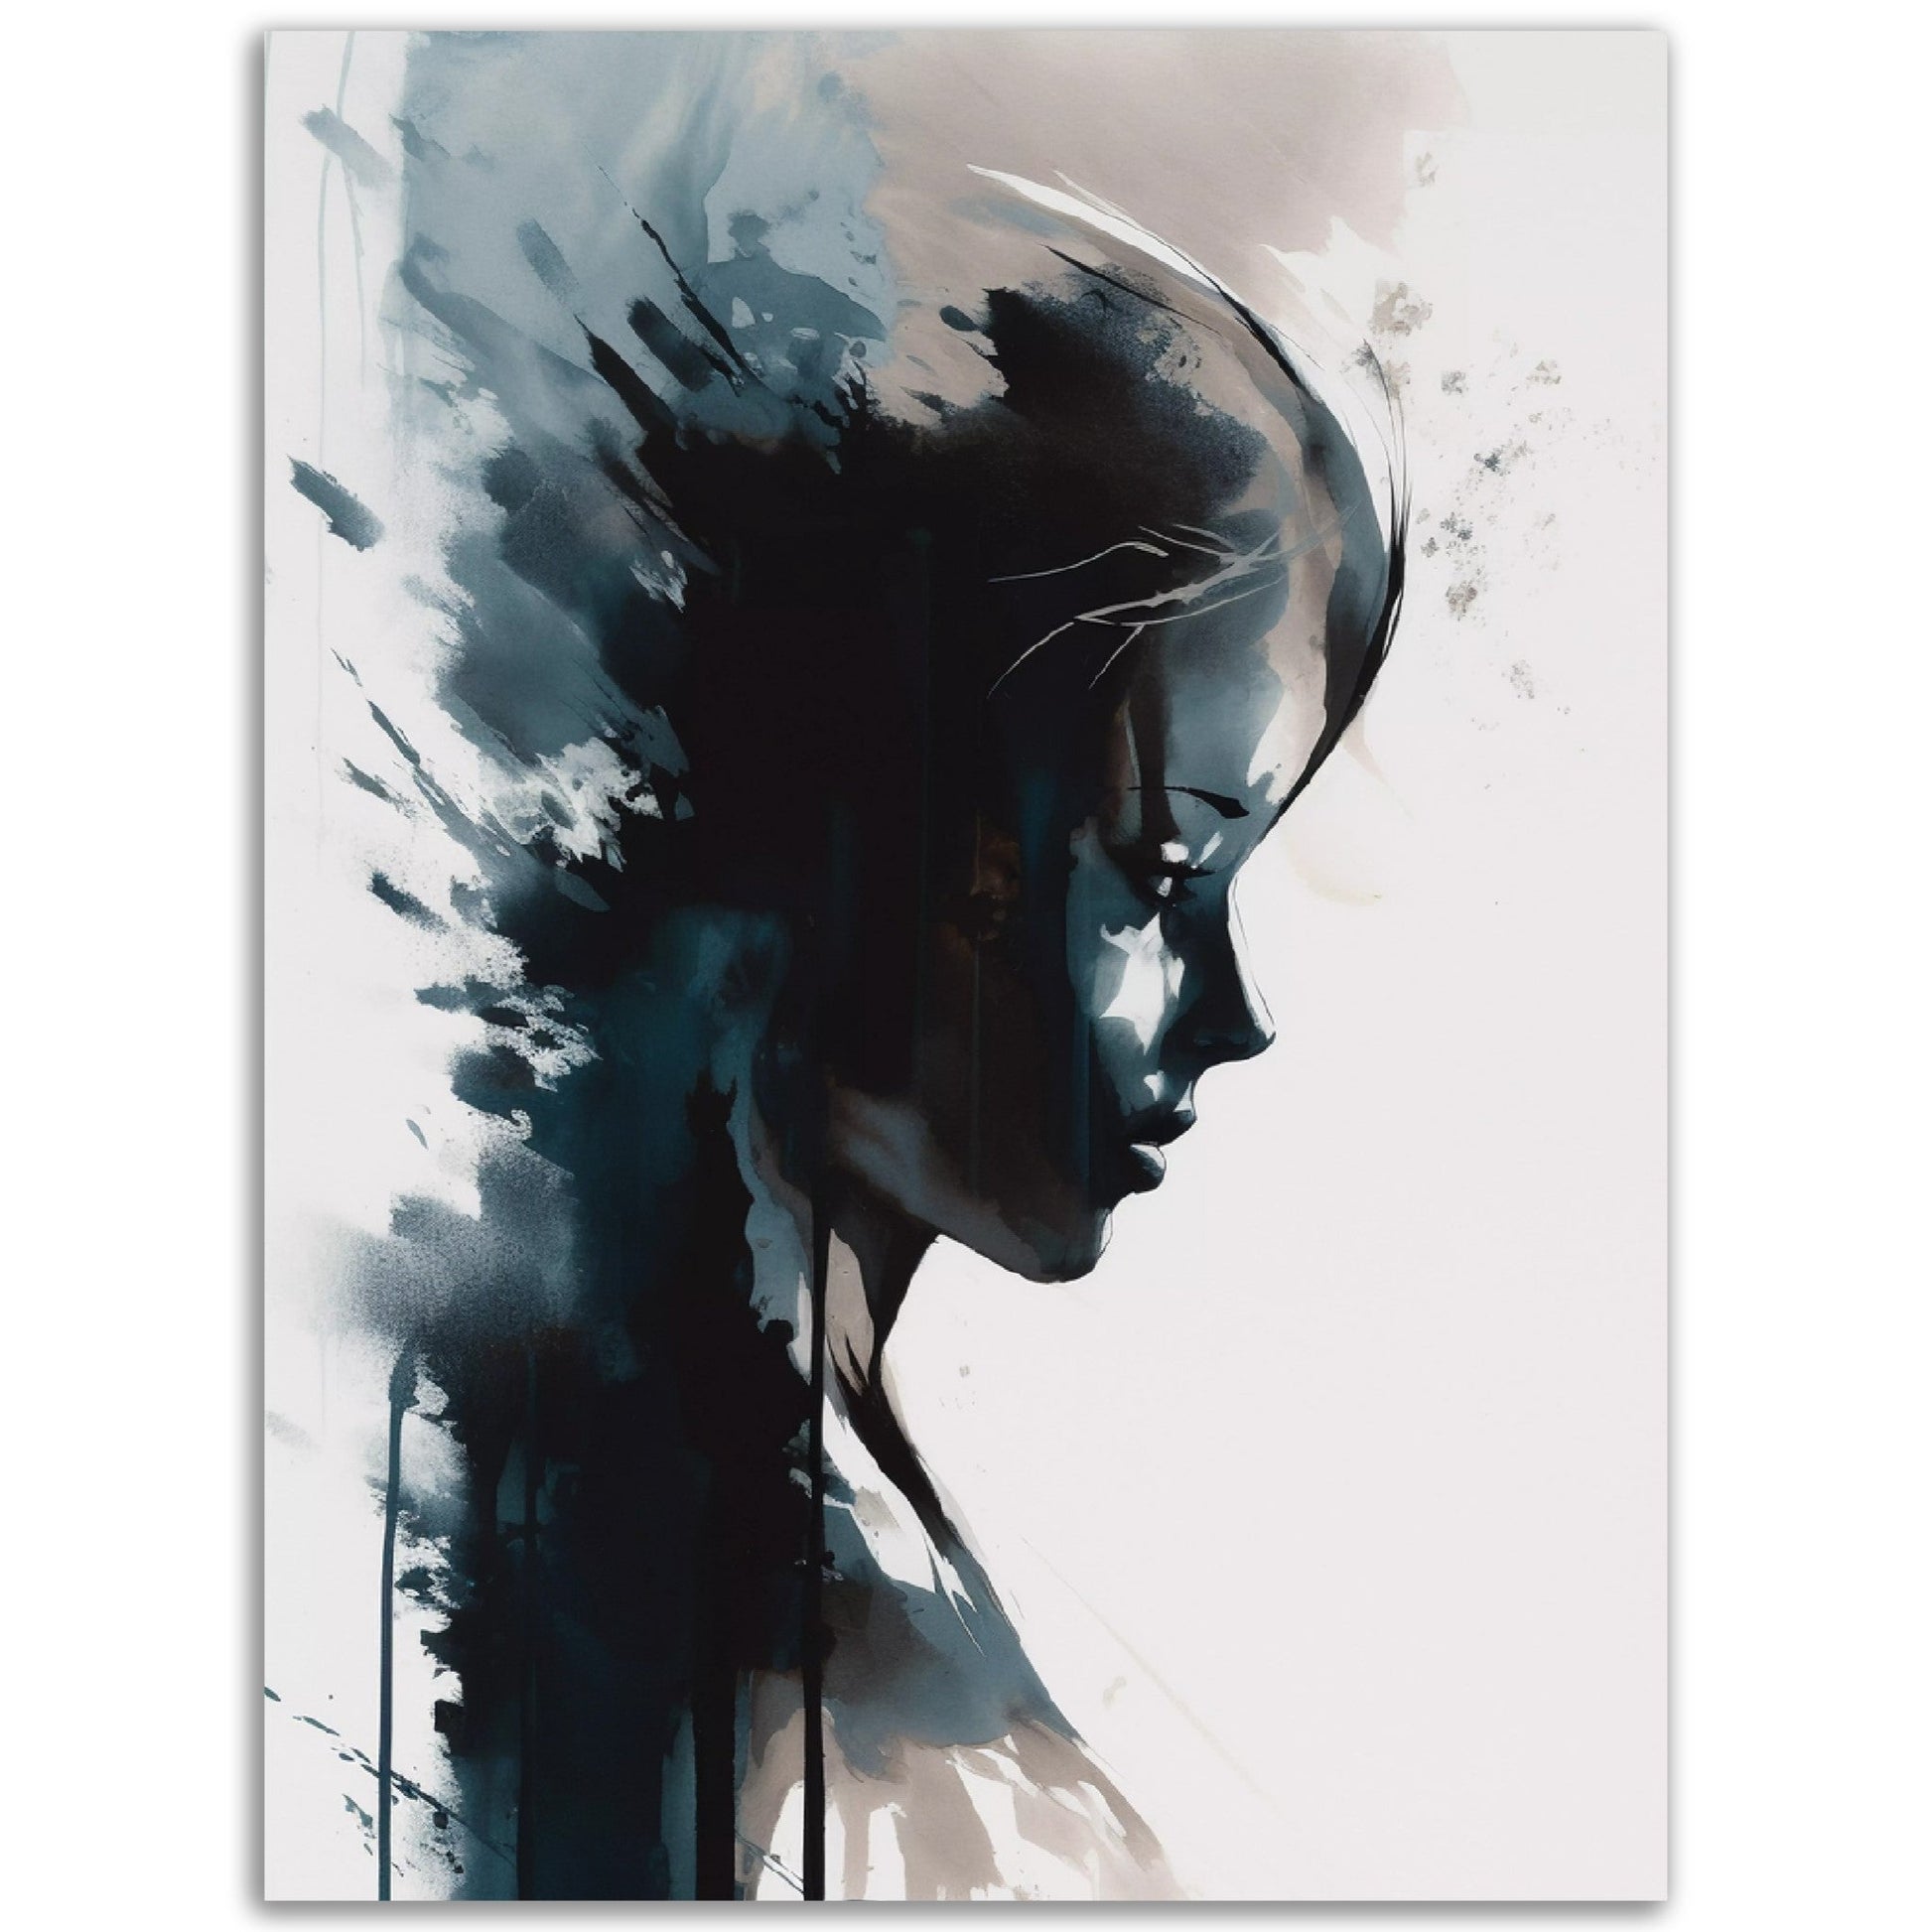 A stunning Abstract Art painting of a woman's face available as "Passing Yourself" high quality posters.